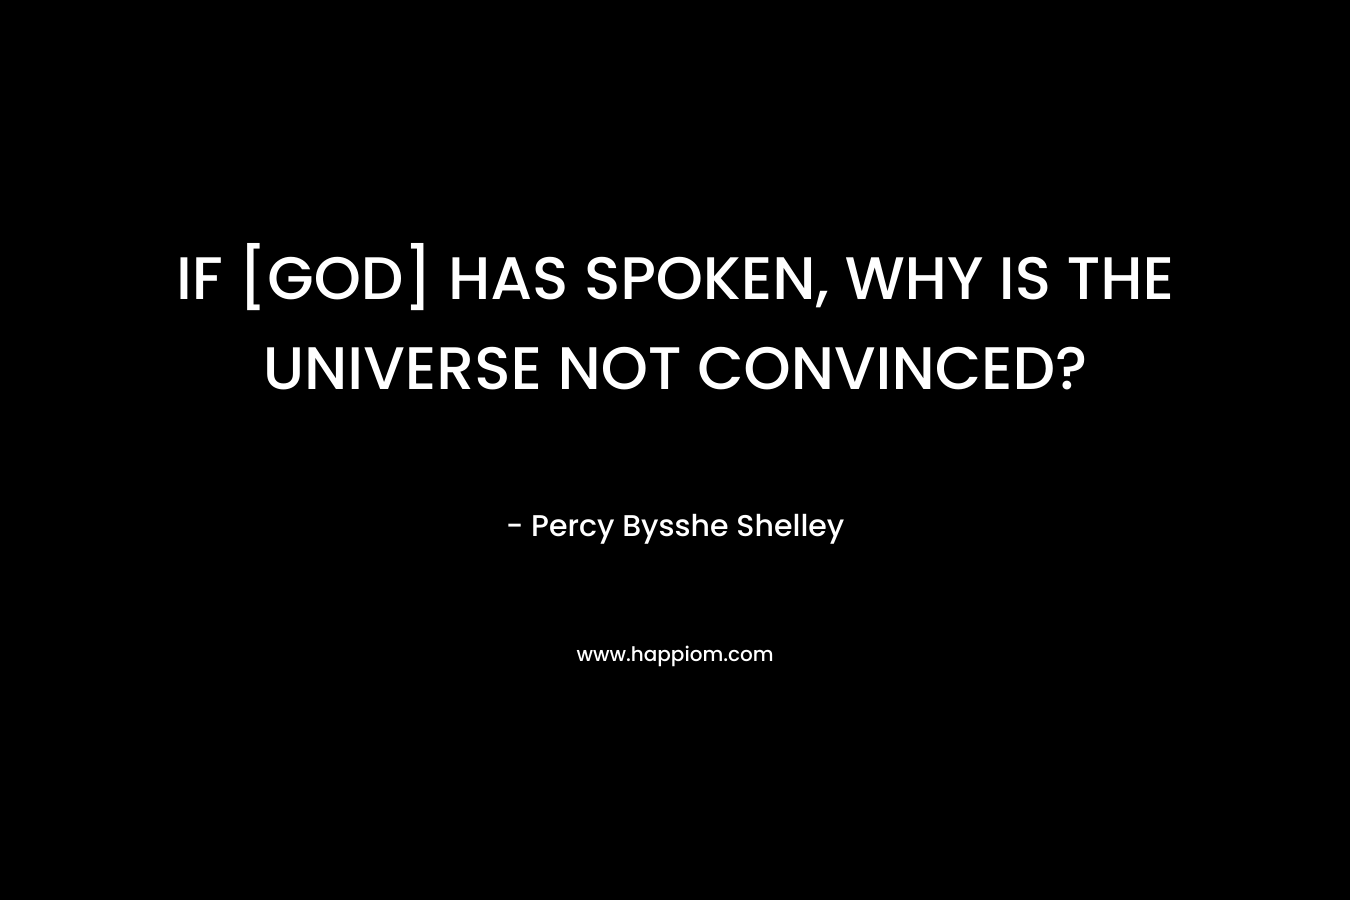 IF [GOD] HAS SPOKEN, WHY IS THE UNIVERSE NOT CONVINCED? – Percy Bysshe Shelley